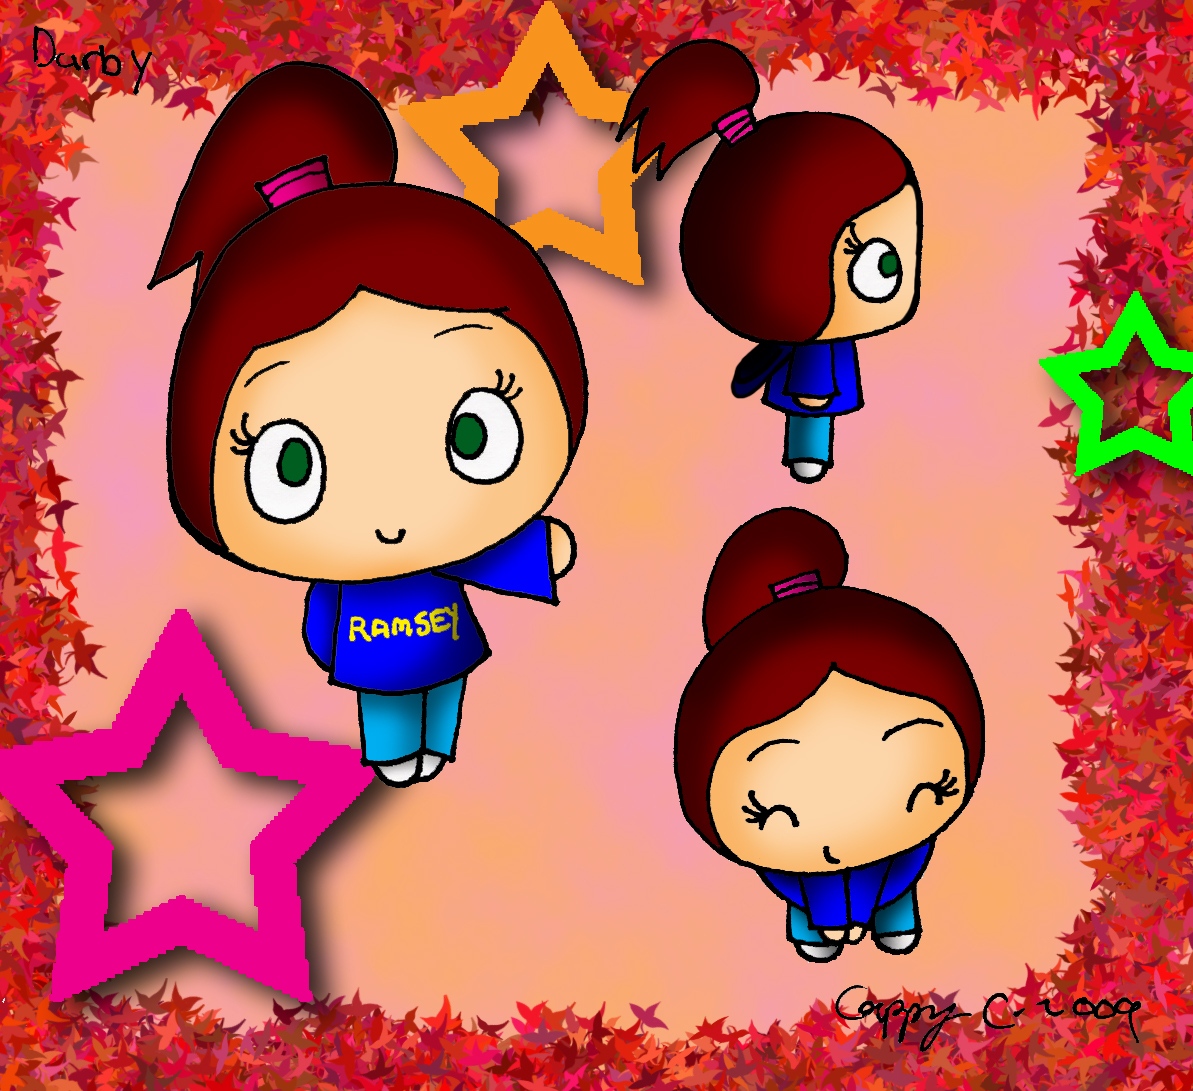 Darby - In Pucca Style - :D